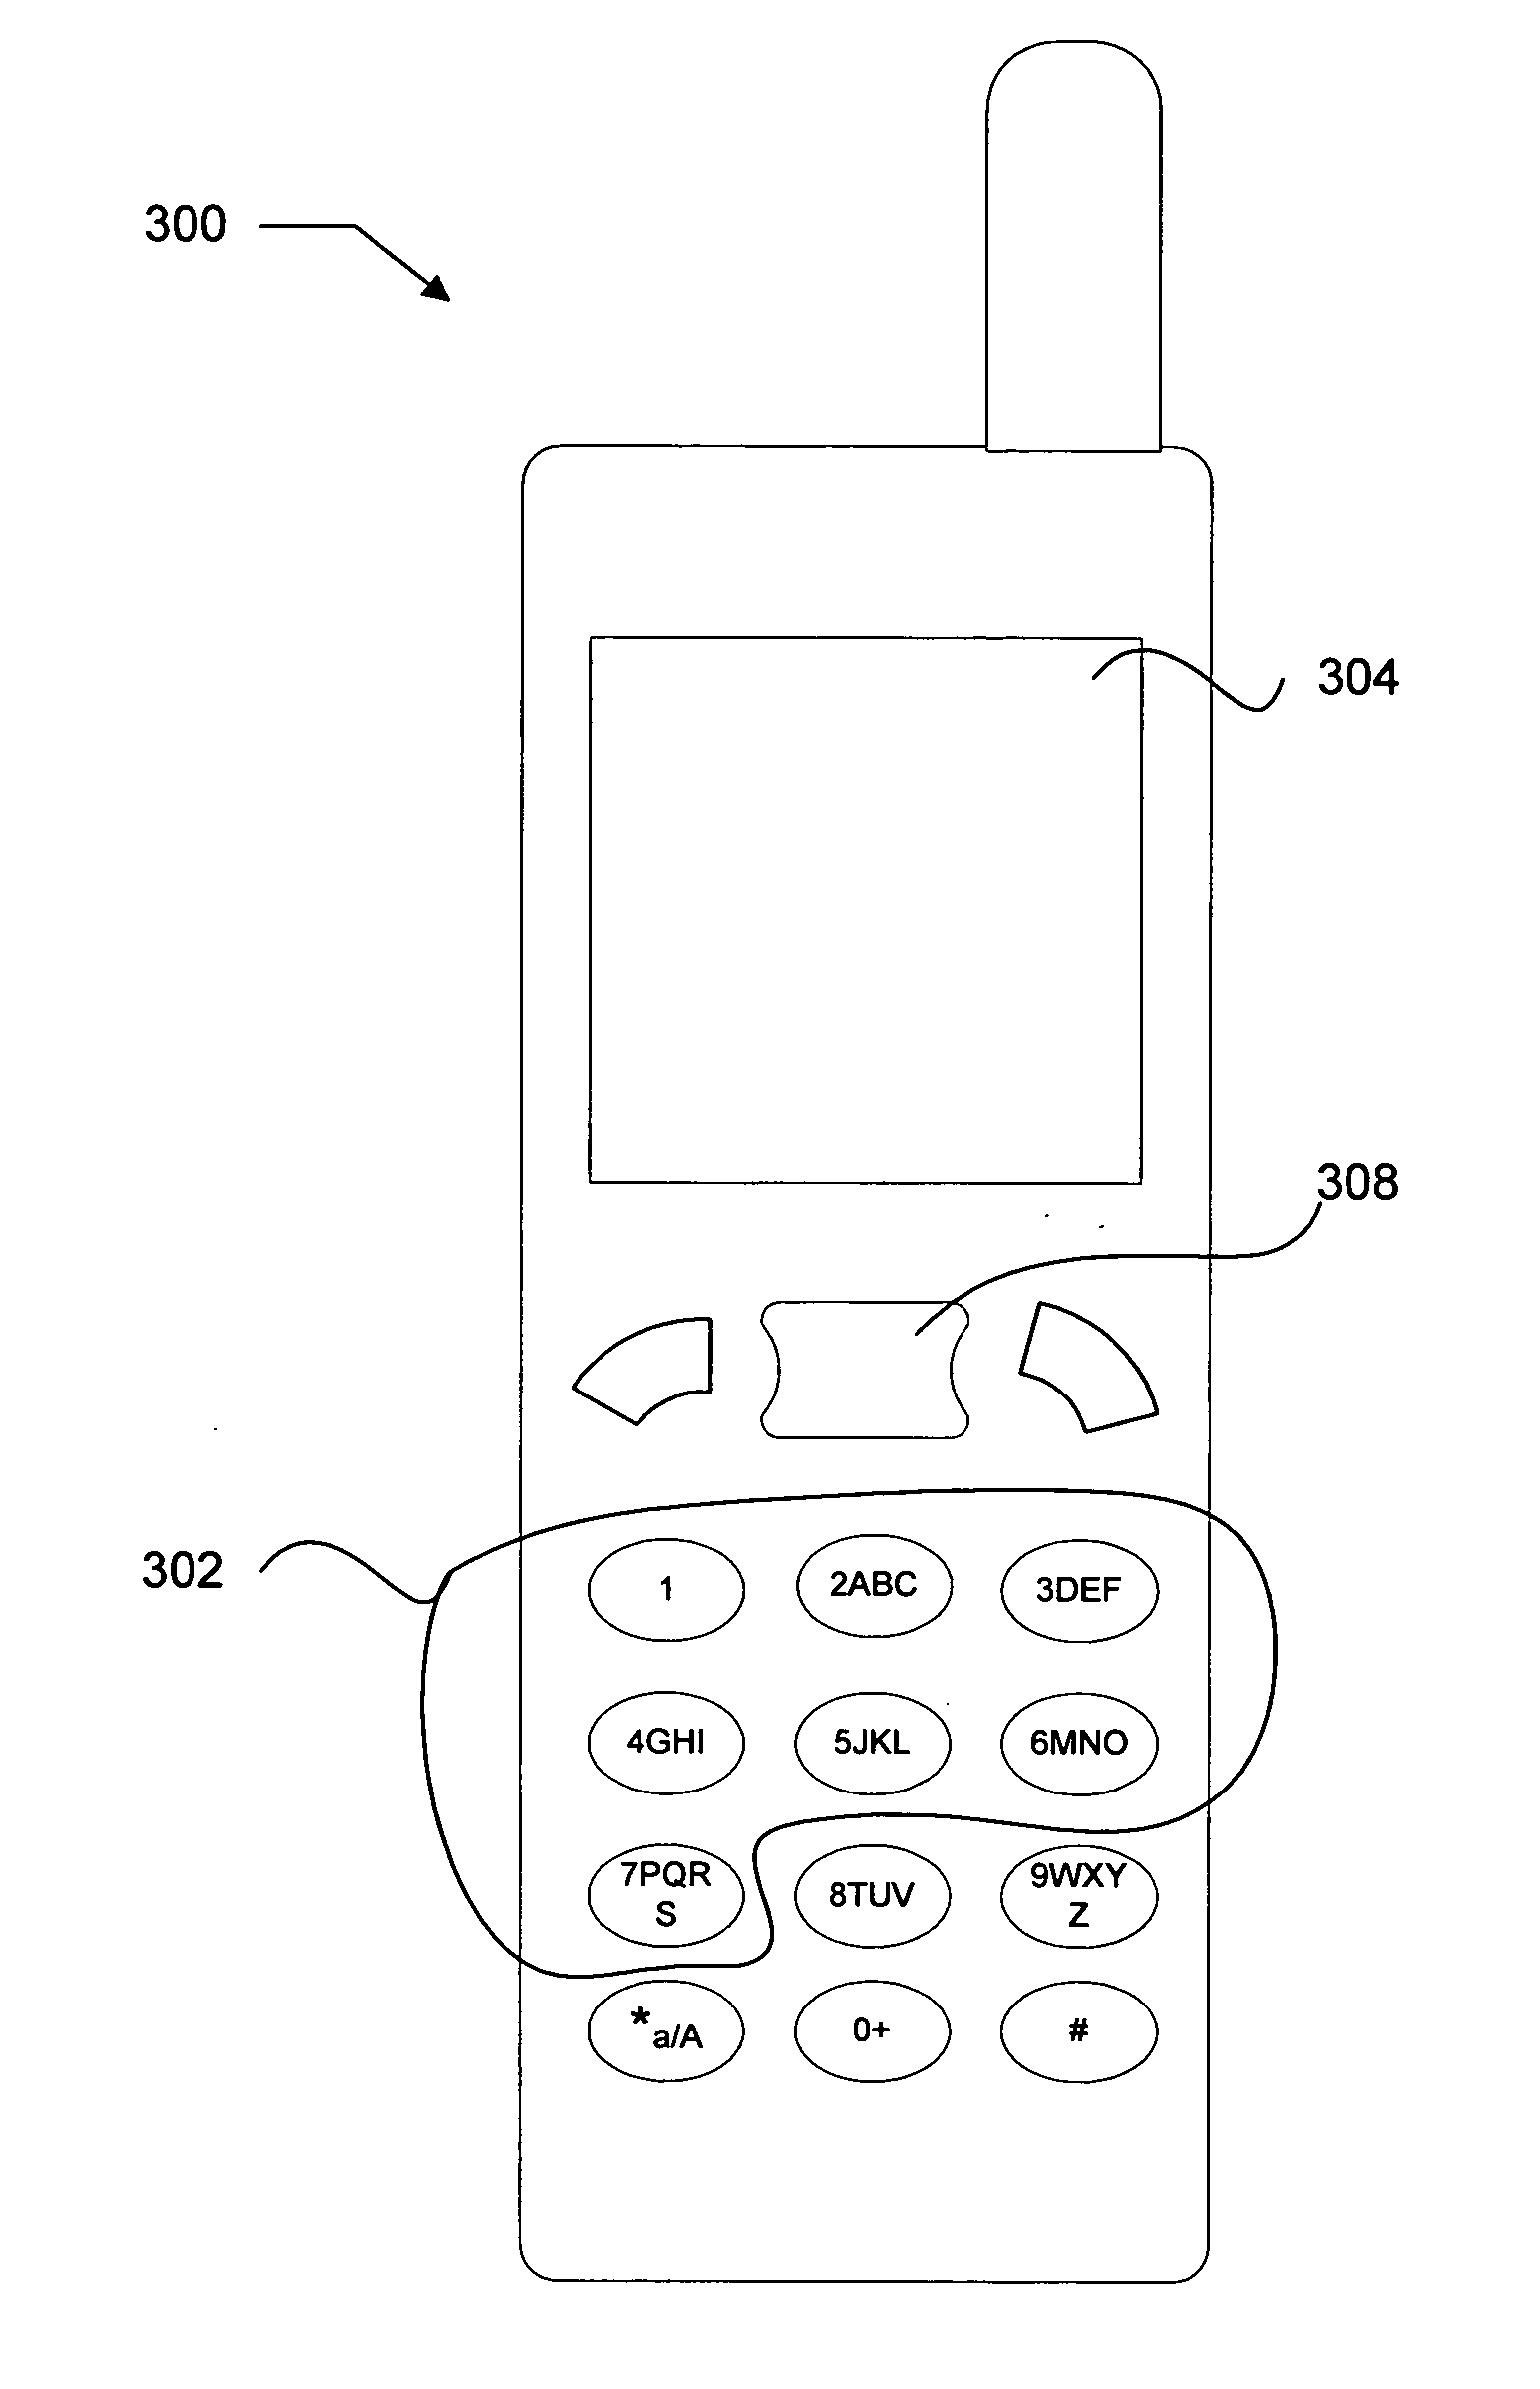 Method of composing music on a handheld device